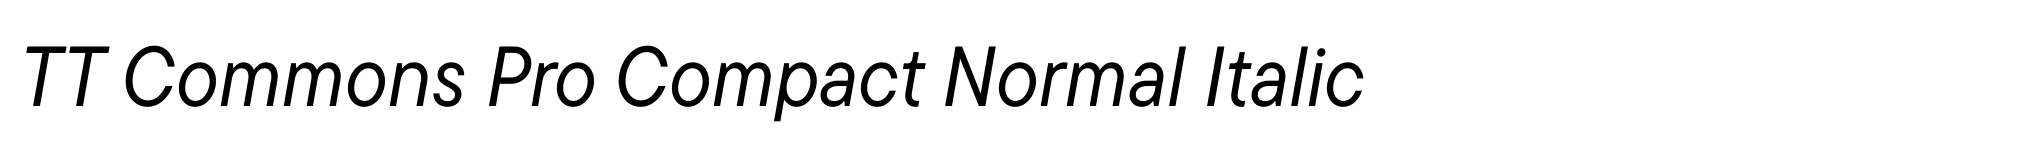 TT Commons Pro Compact Normal Italic image